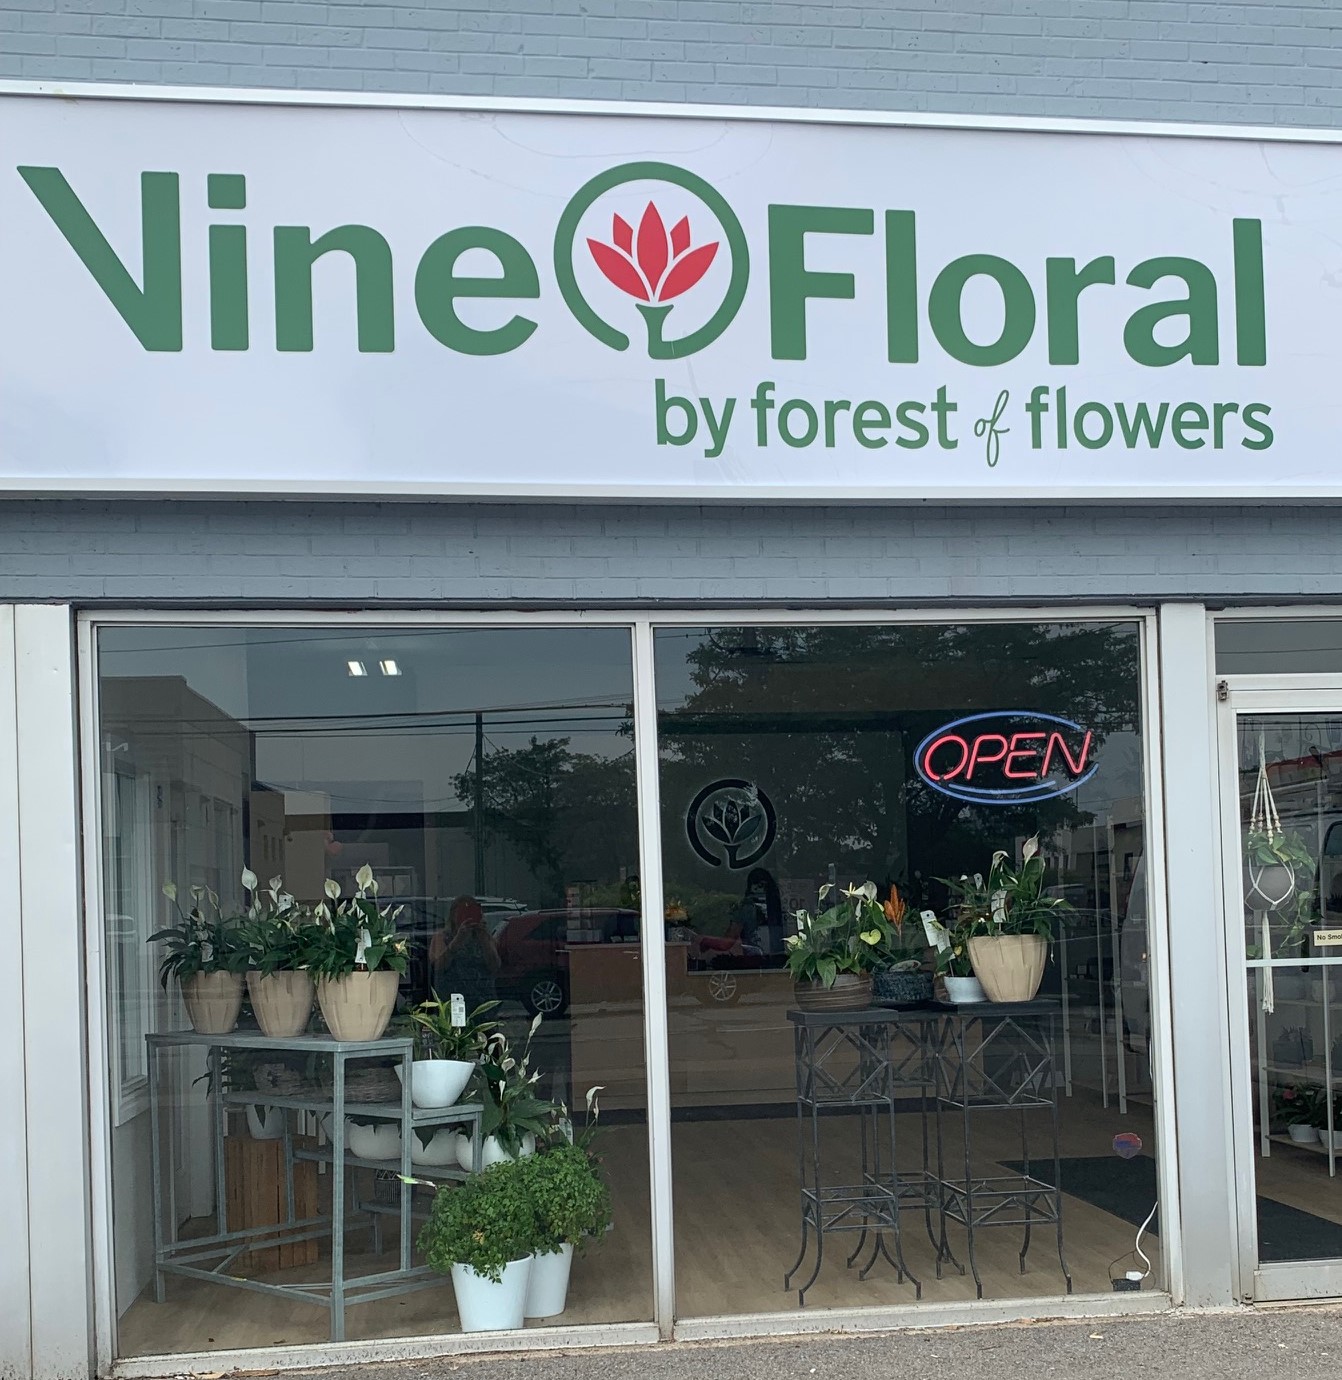 Vine Floral by Forest of Flowers